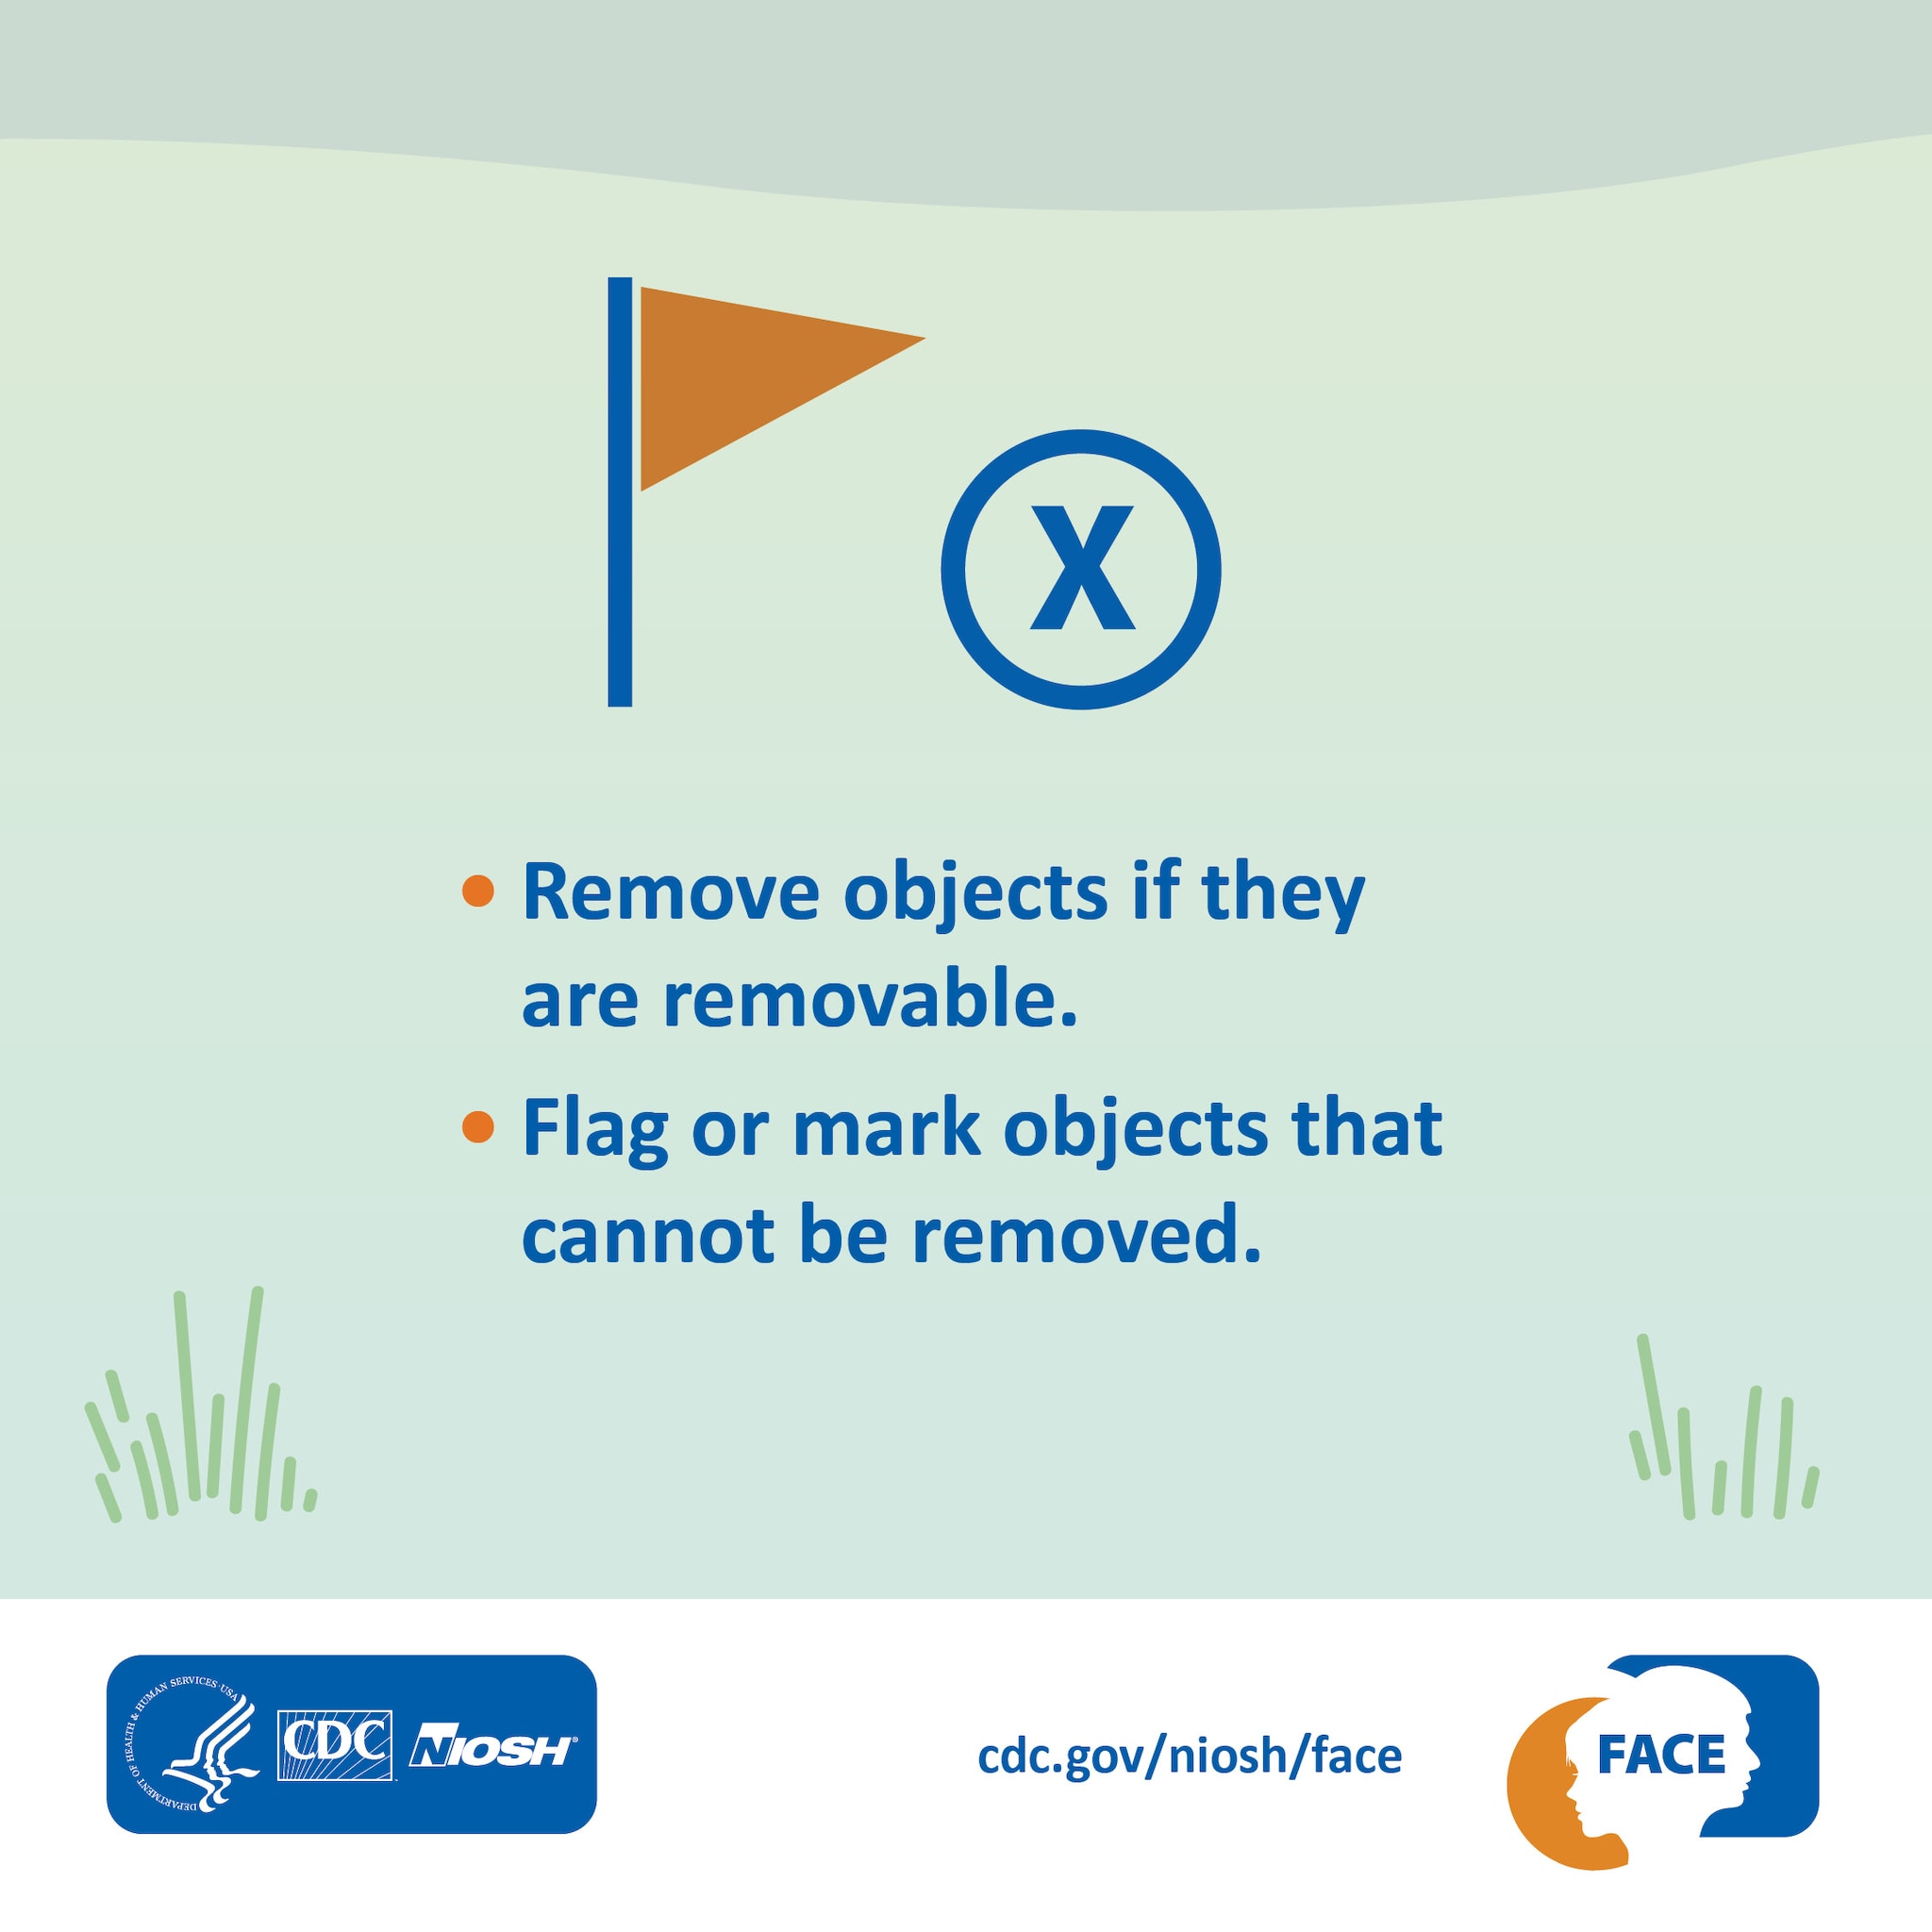 Remove objects if they are removable. Flag or mark objects that cannot be removed.